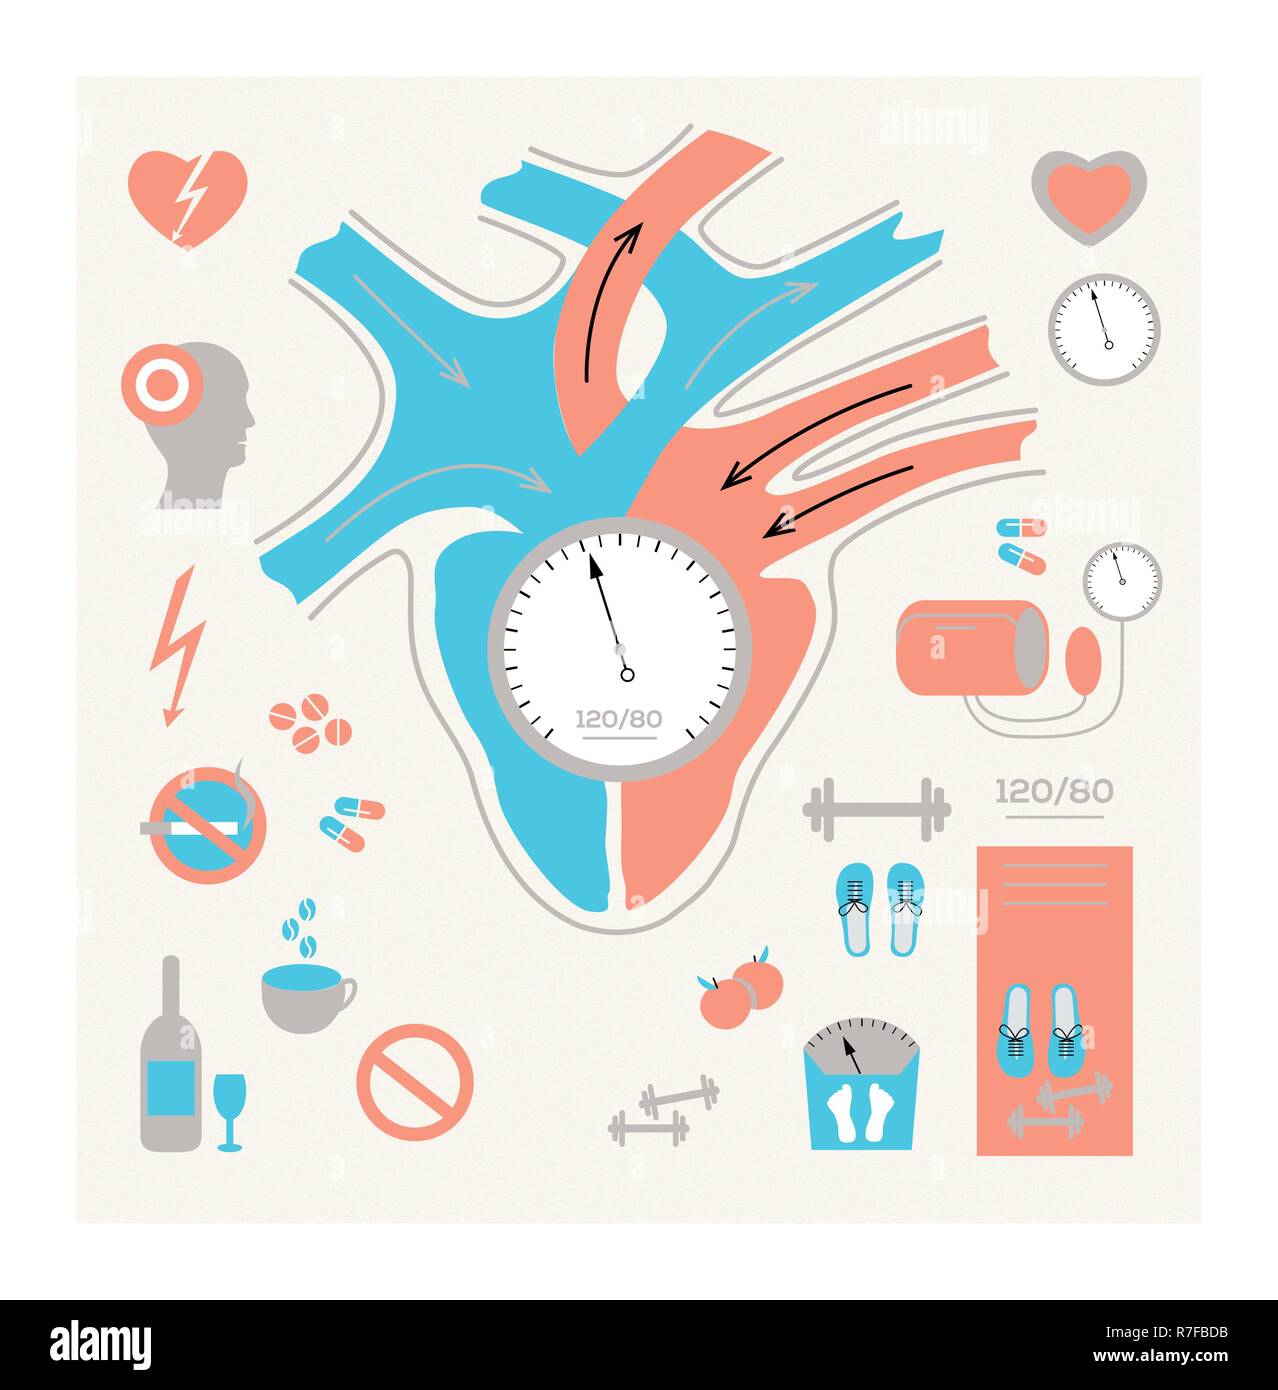 Vector medical illustration, info-graphics, on the topic of heart health, a device for measuring pressure, pills, pills, headache, healthy lifestyle. Stock Vector